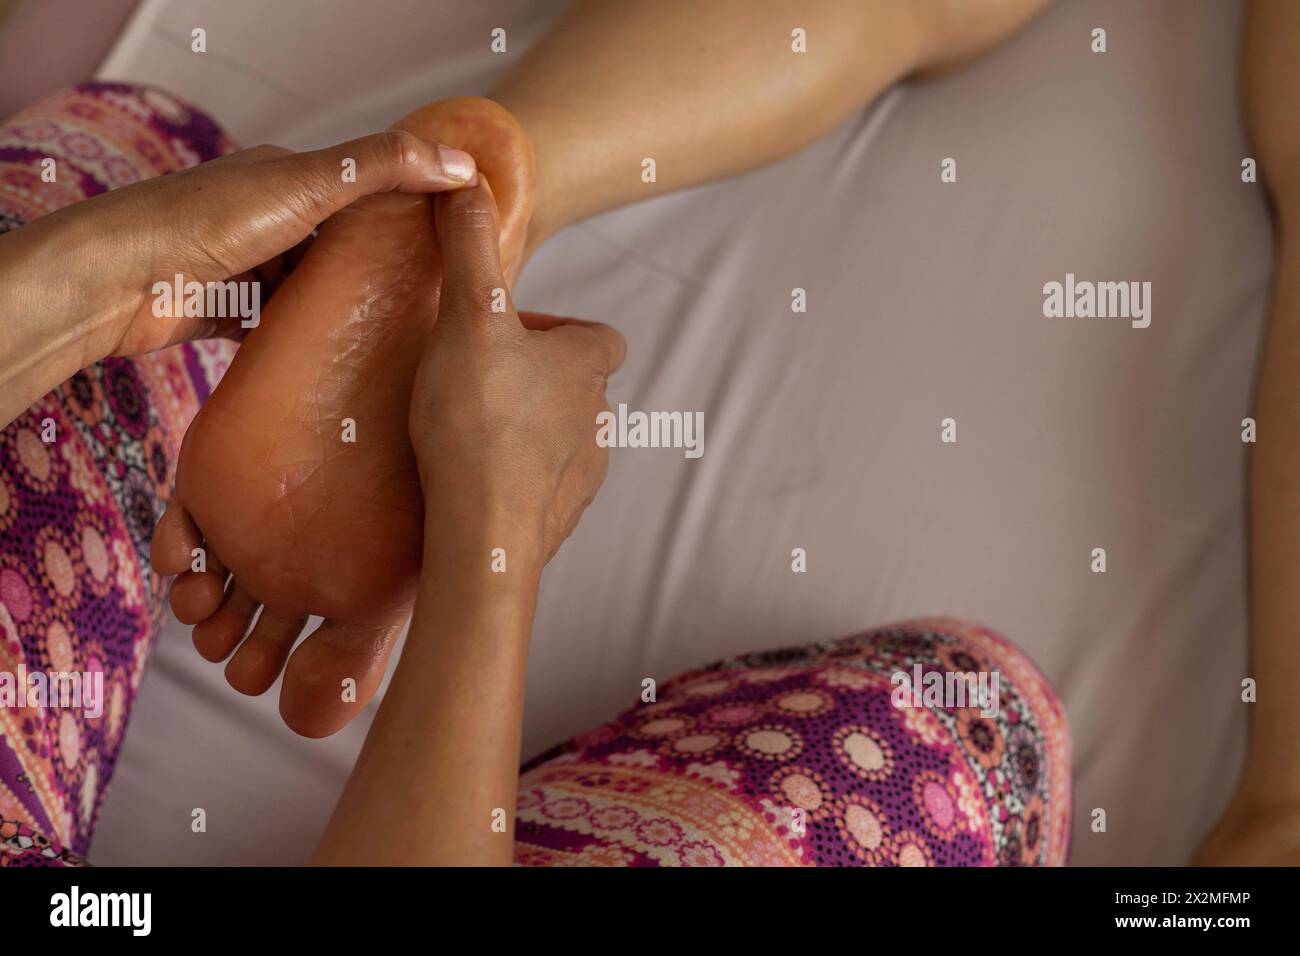 Latina woman lying on her back receives an ayurvedic massage treatment on her foot, in the foreground hands of a woman masseuse. Healing massage conce Stock Photo